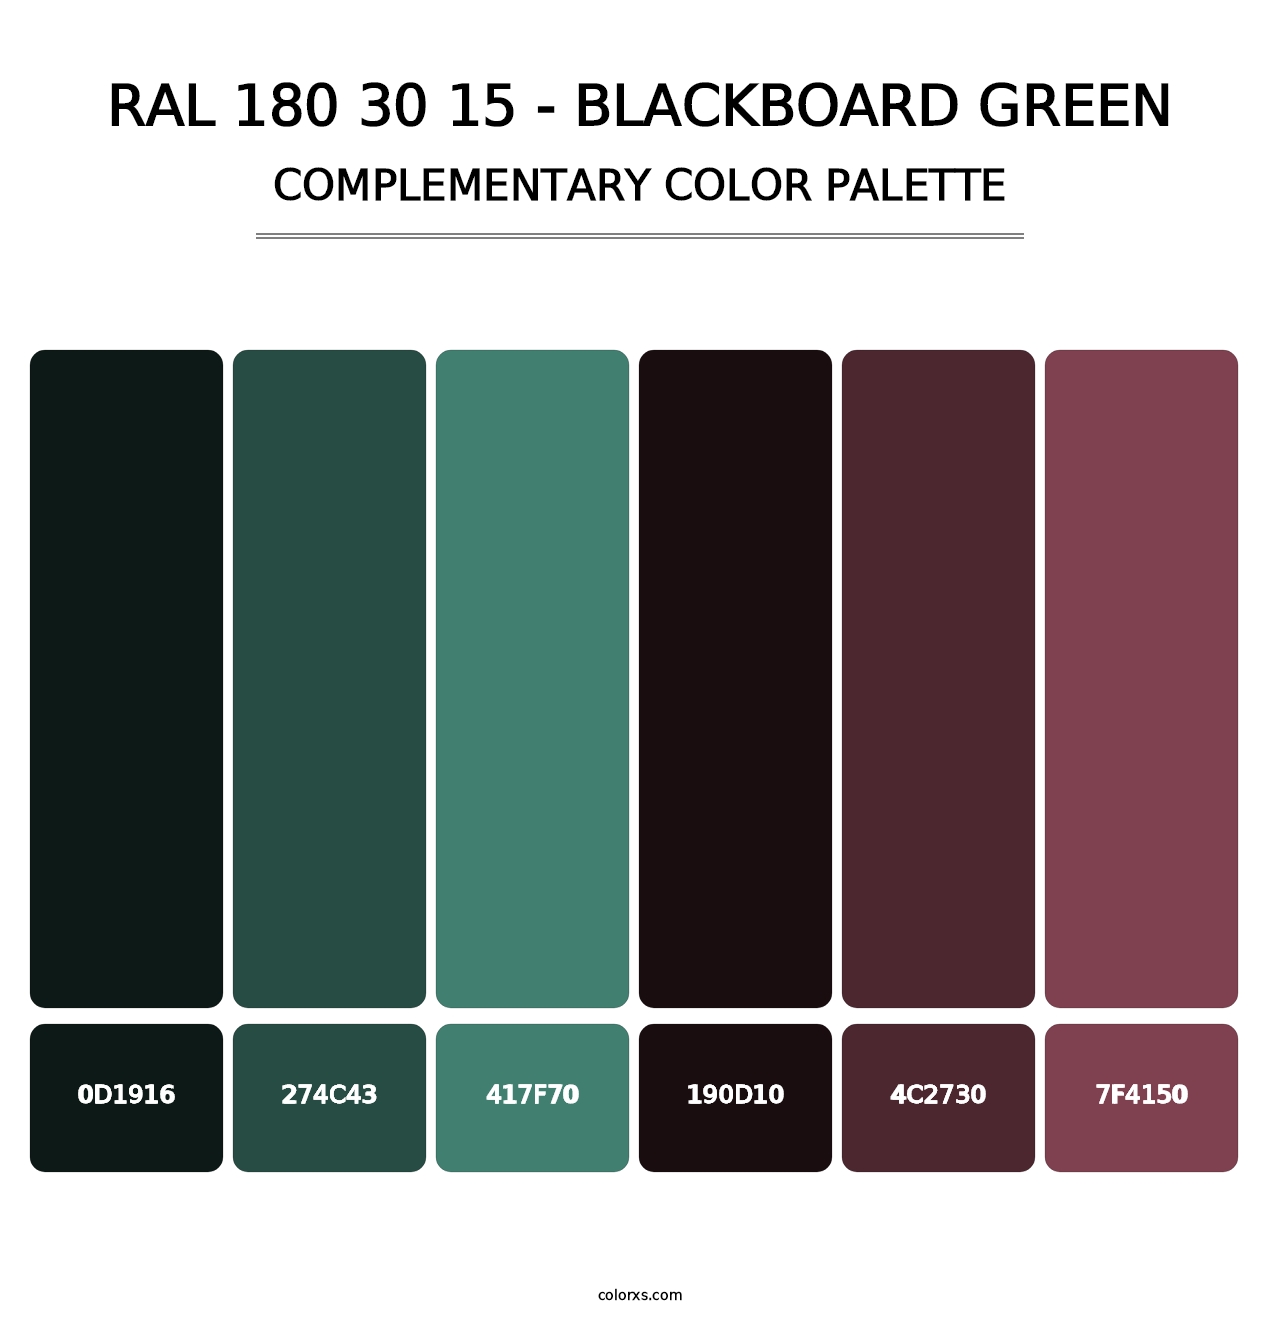 RAL 180 30 15 - Blackboard Green - Complementary Color Palette